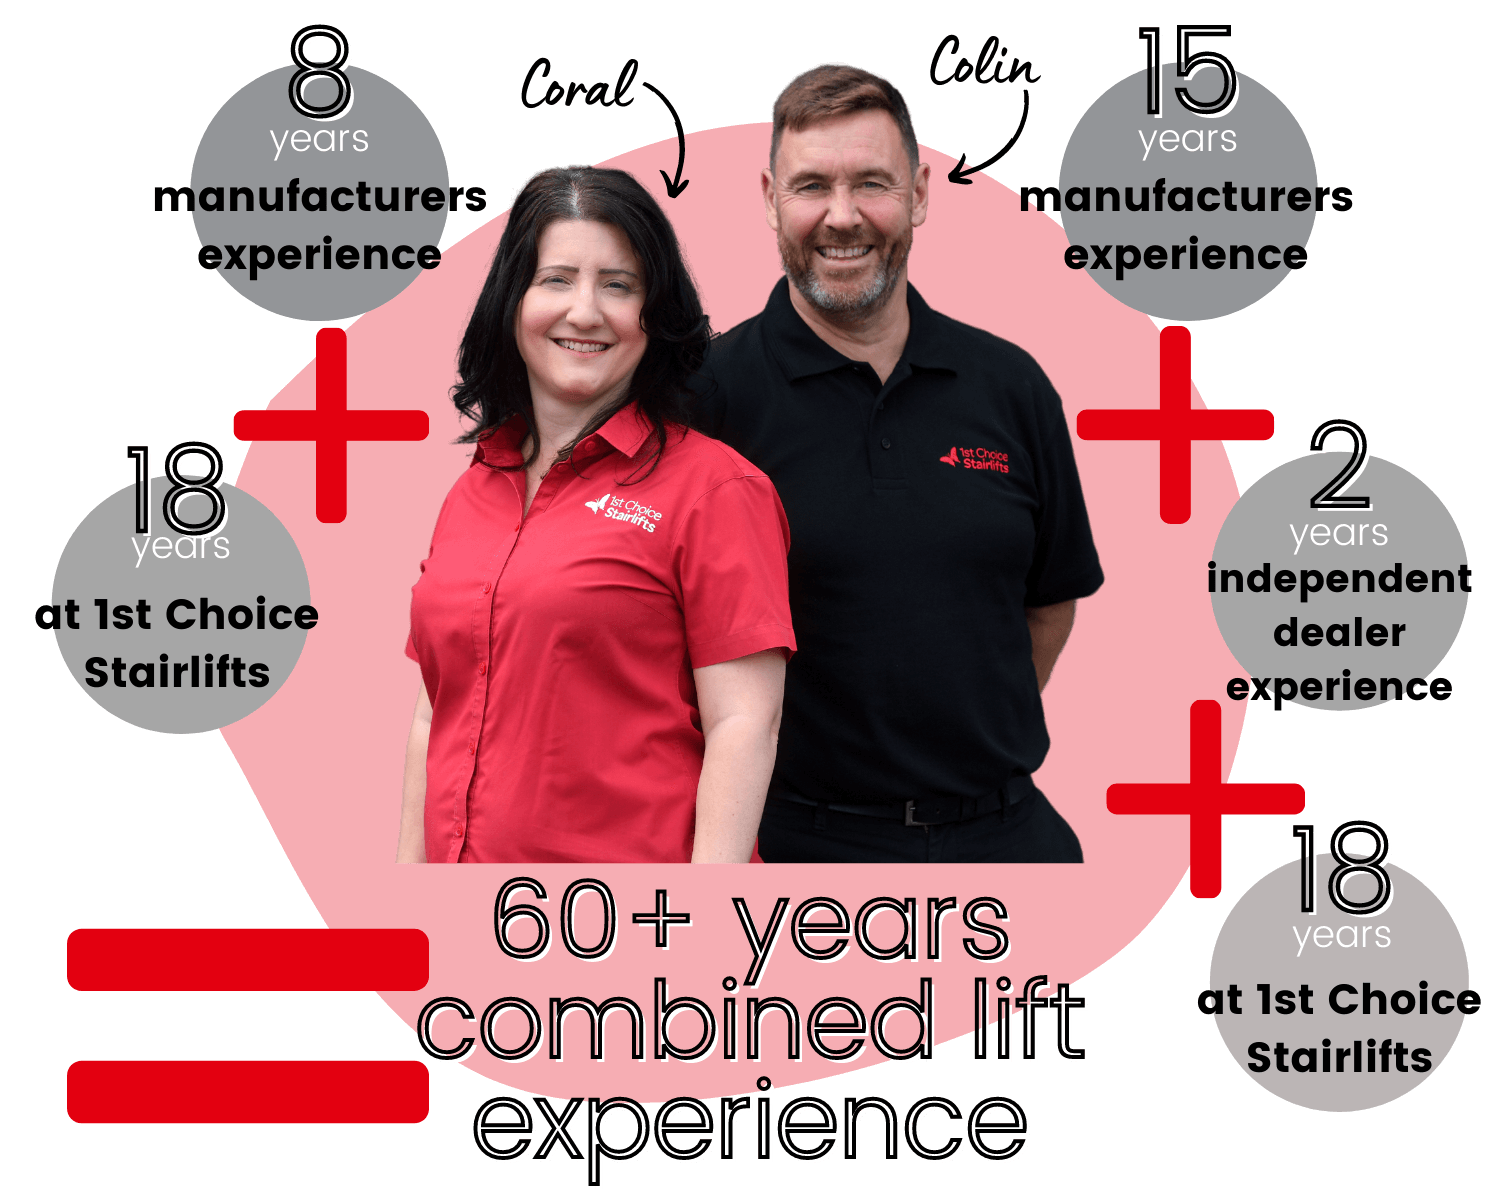 Years experience Coral and Colin